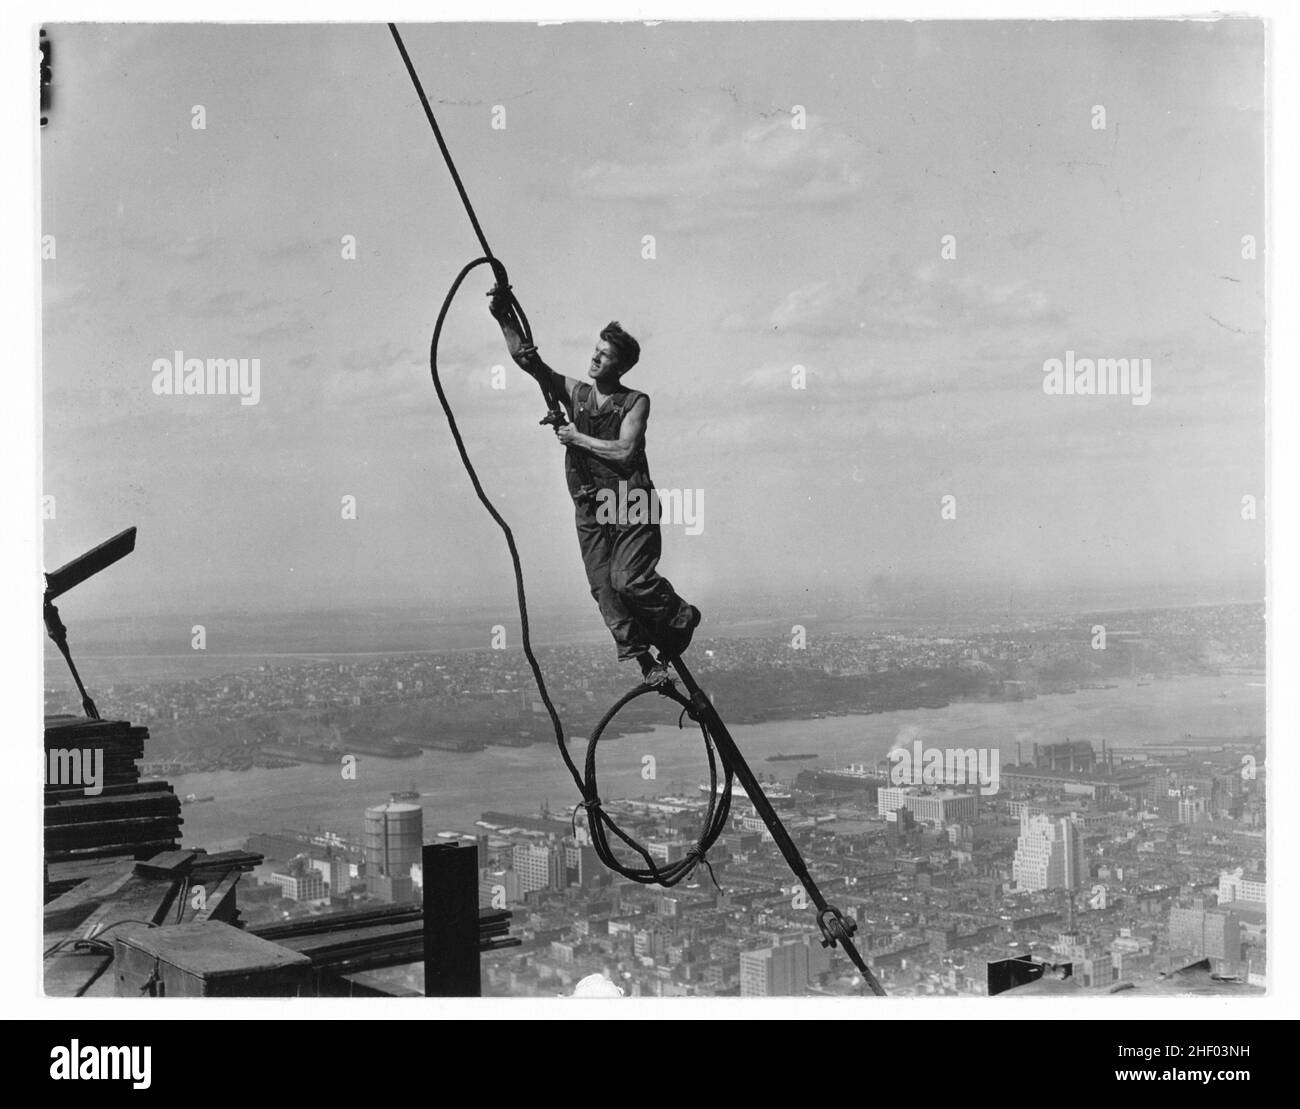 Icarus, Empire State Building - 1930. Photo: Lewis Hine (American, 1874–1940). Vintage New York photo. Stock Photo